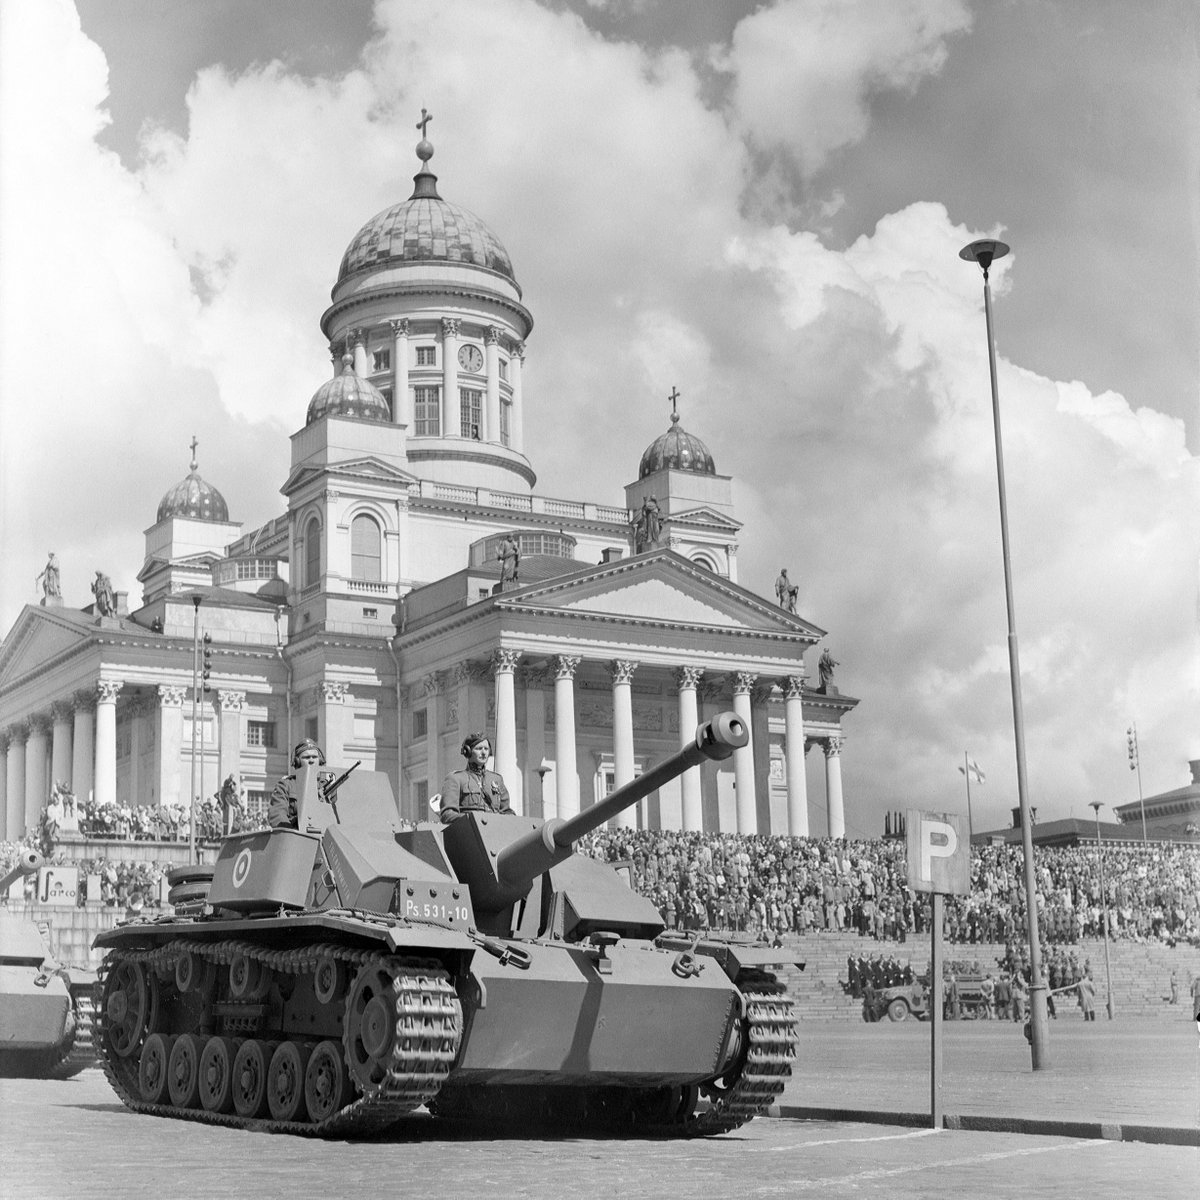 StuG III driving by the Helsinki Cathedral, during the Finnish Defence Forces Flag Day parade (1952) https://t.co/ZOg8GqjVf2